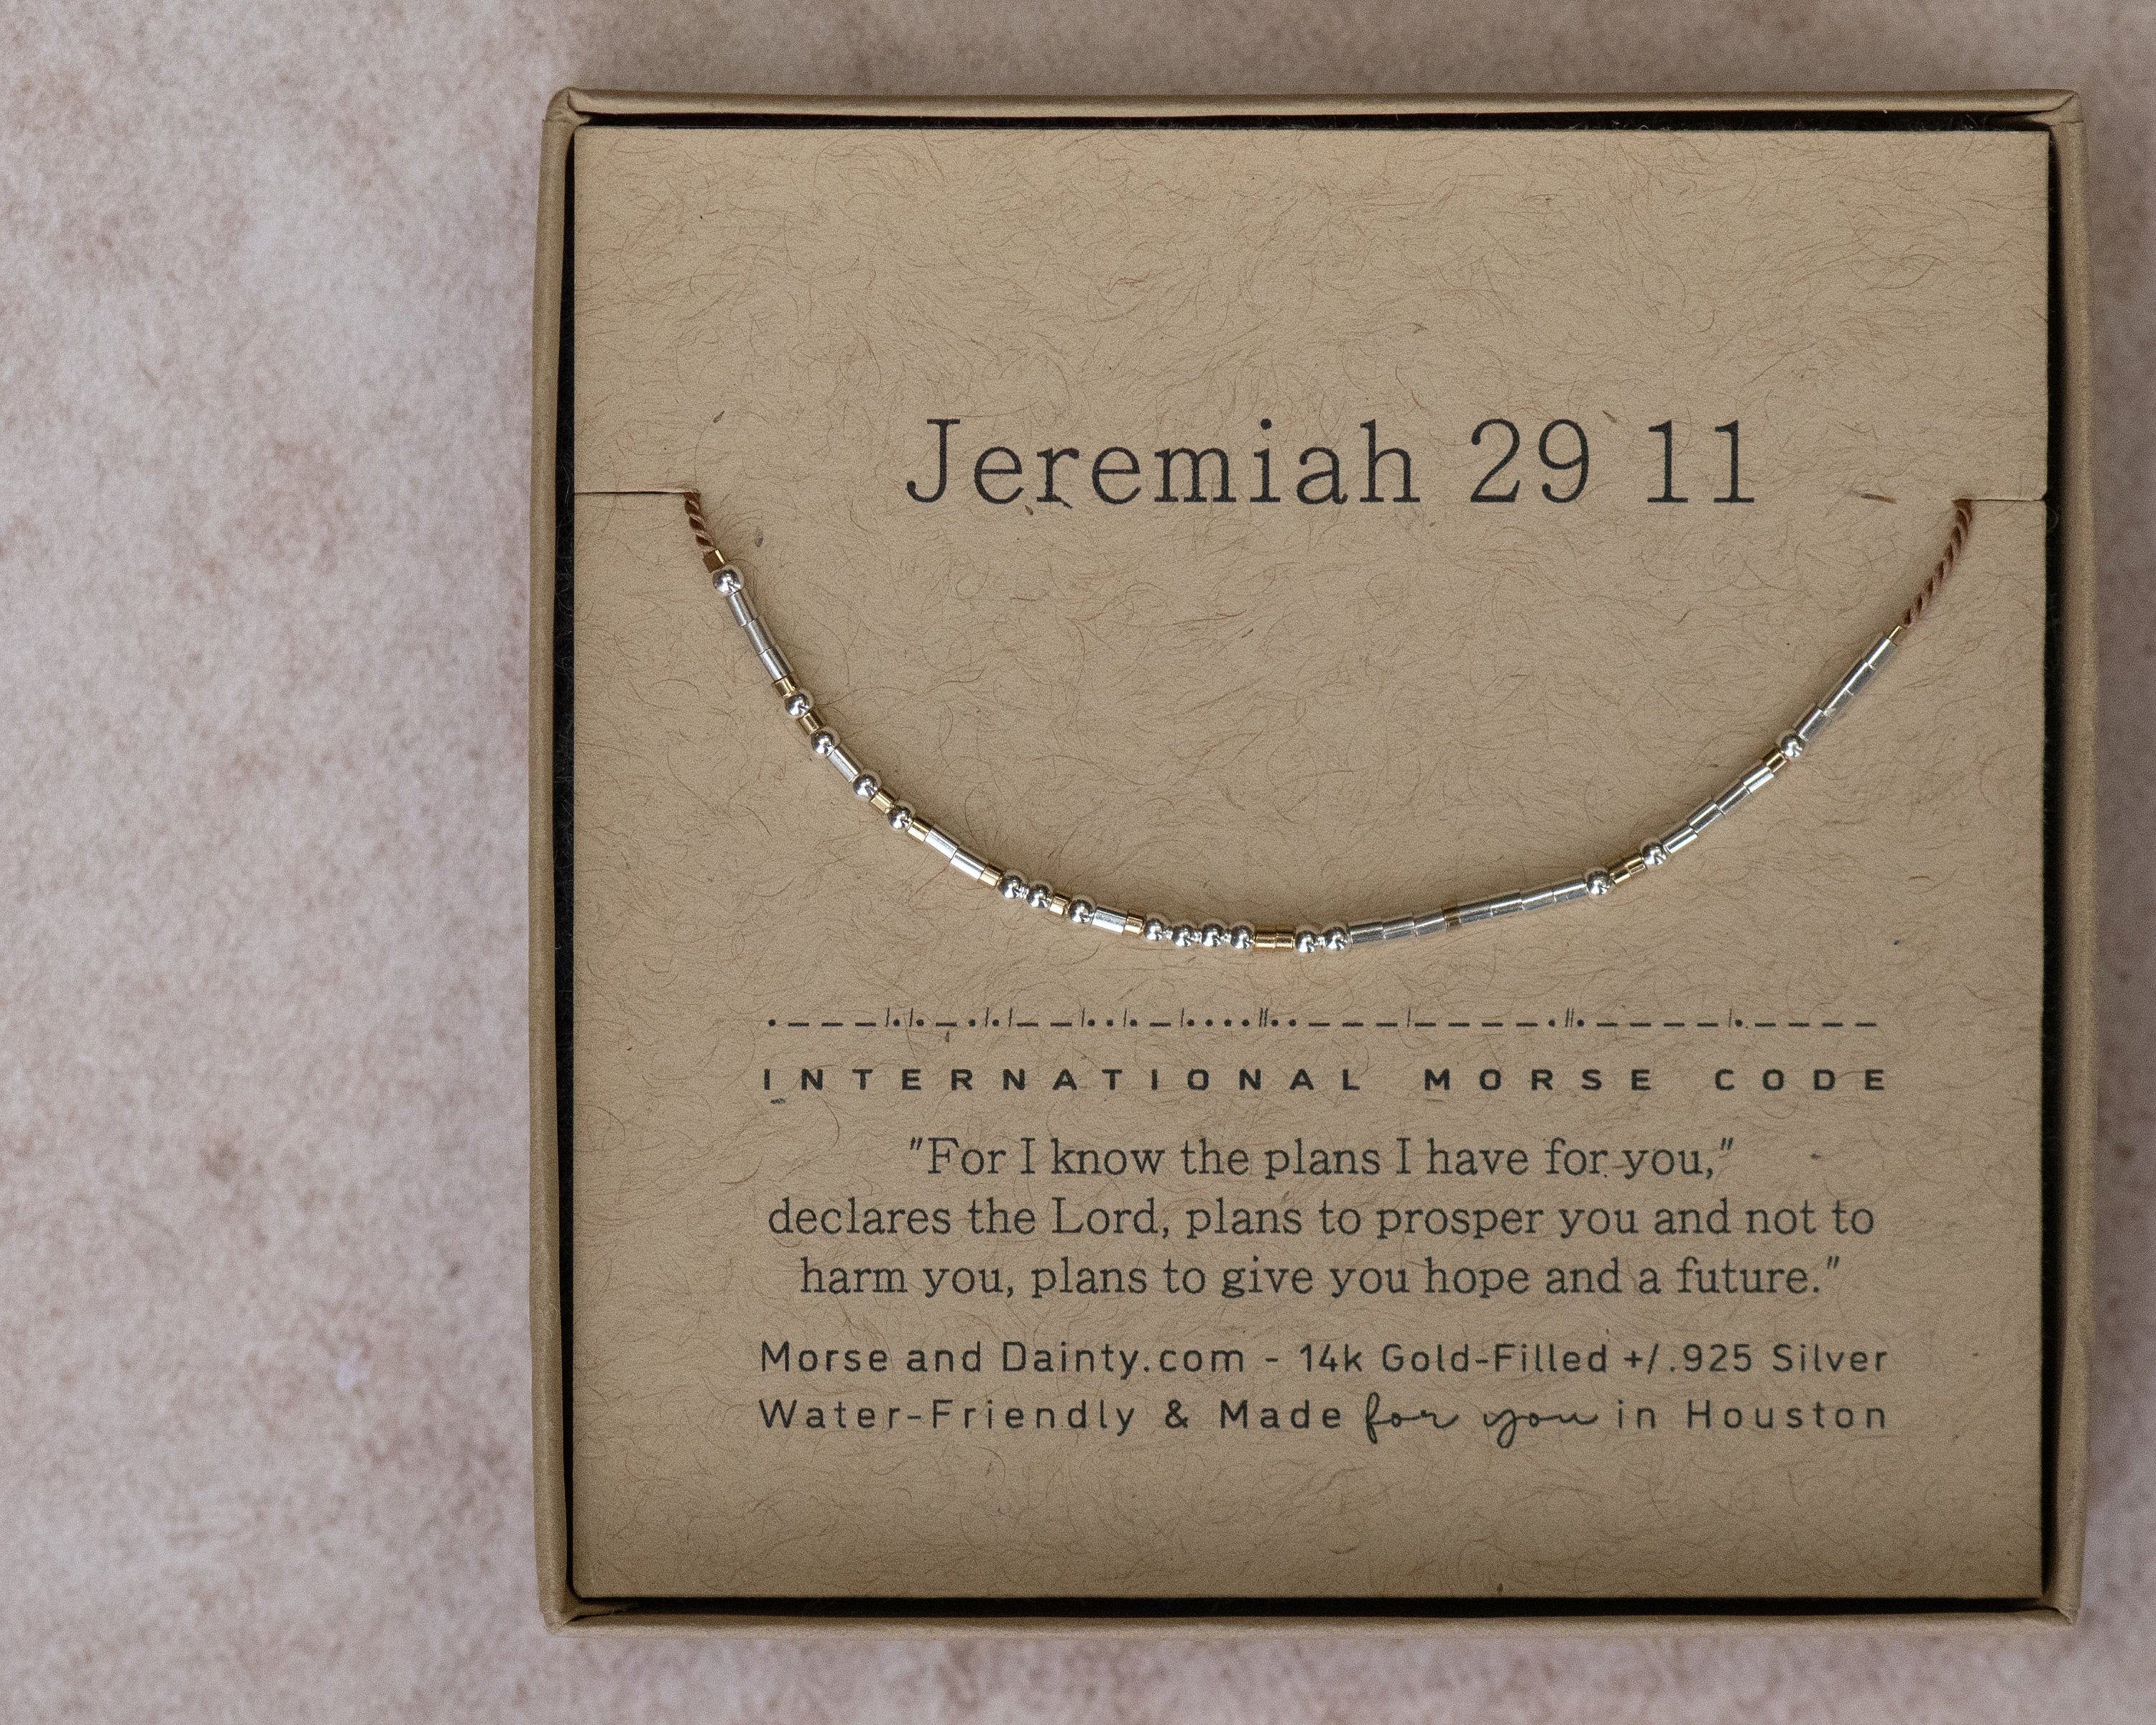 Bible Verse Morse Code Bracelet, Romans 12:12 or Any Custom Bible Verse. Motivational Scripture for Encouragement - Romans 12 12 or any